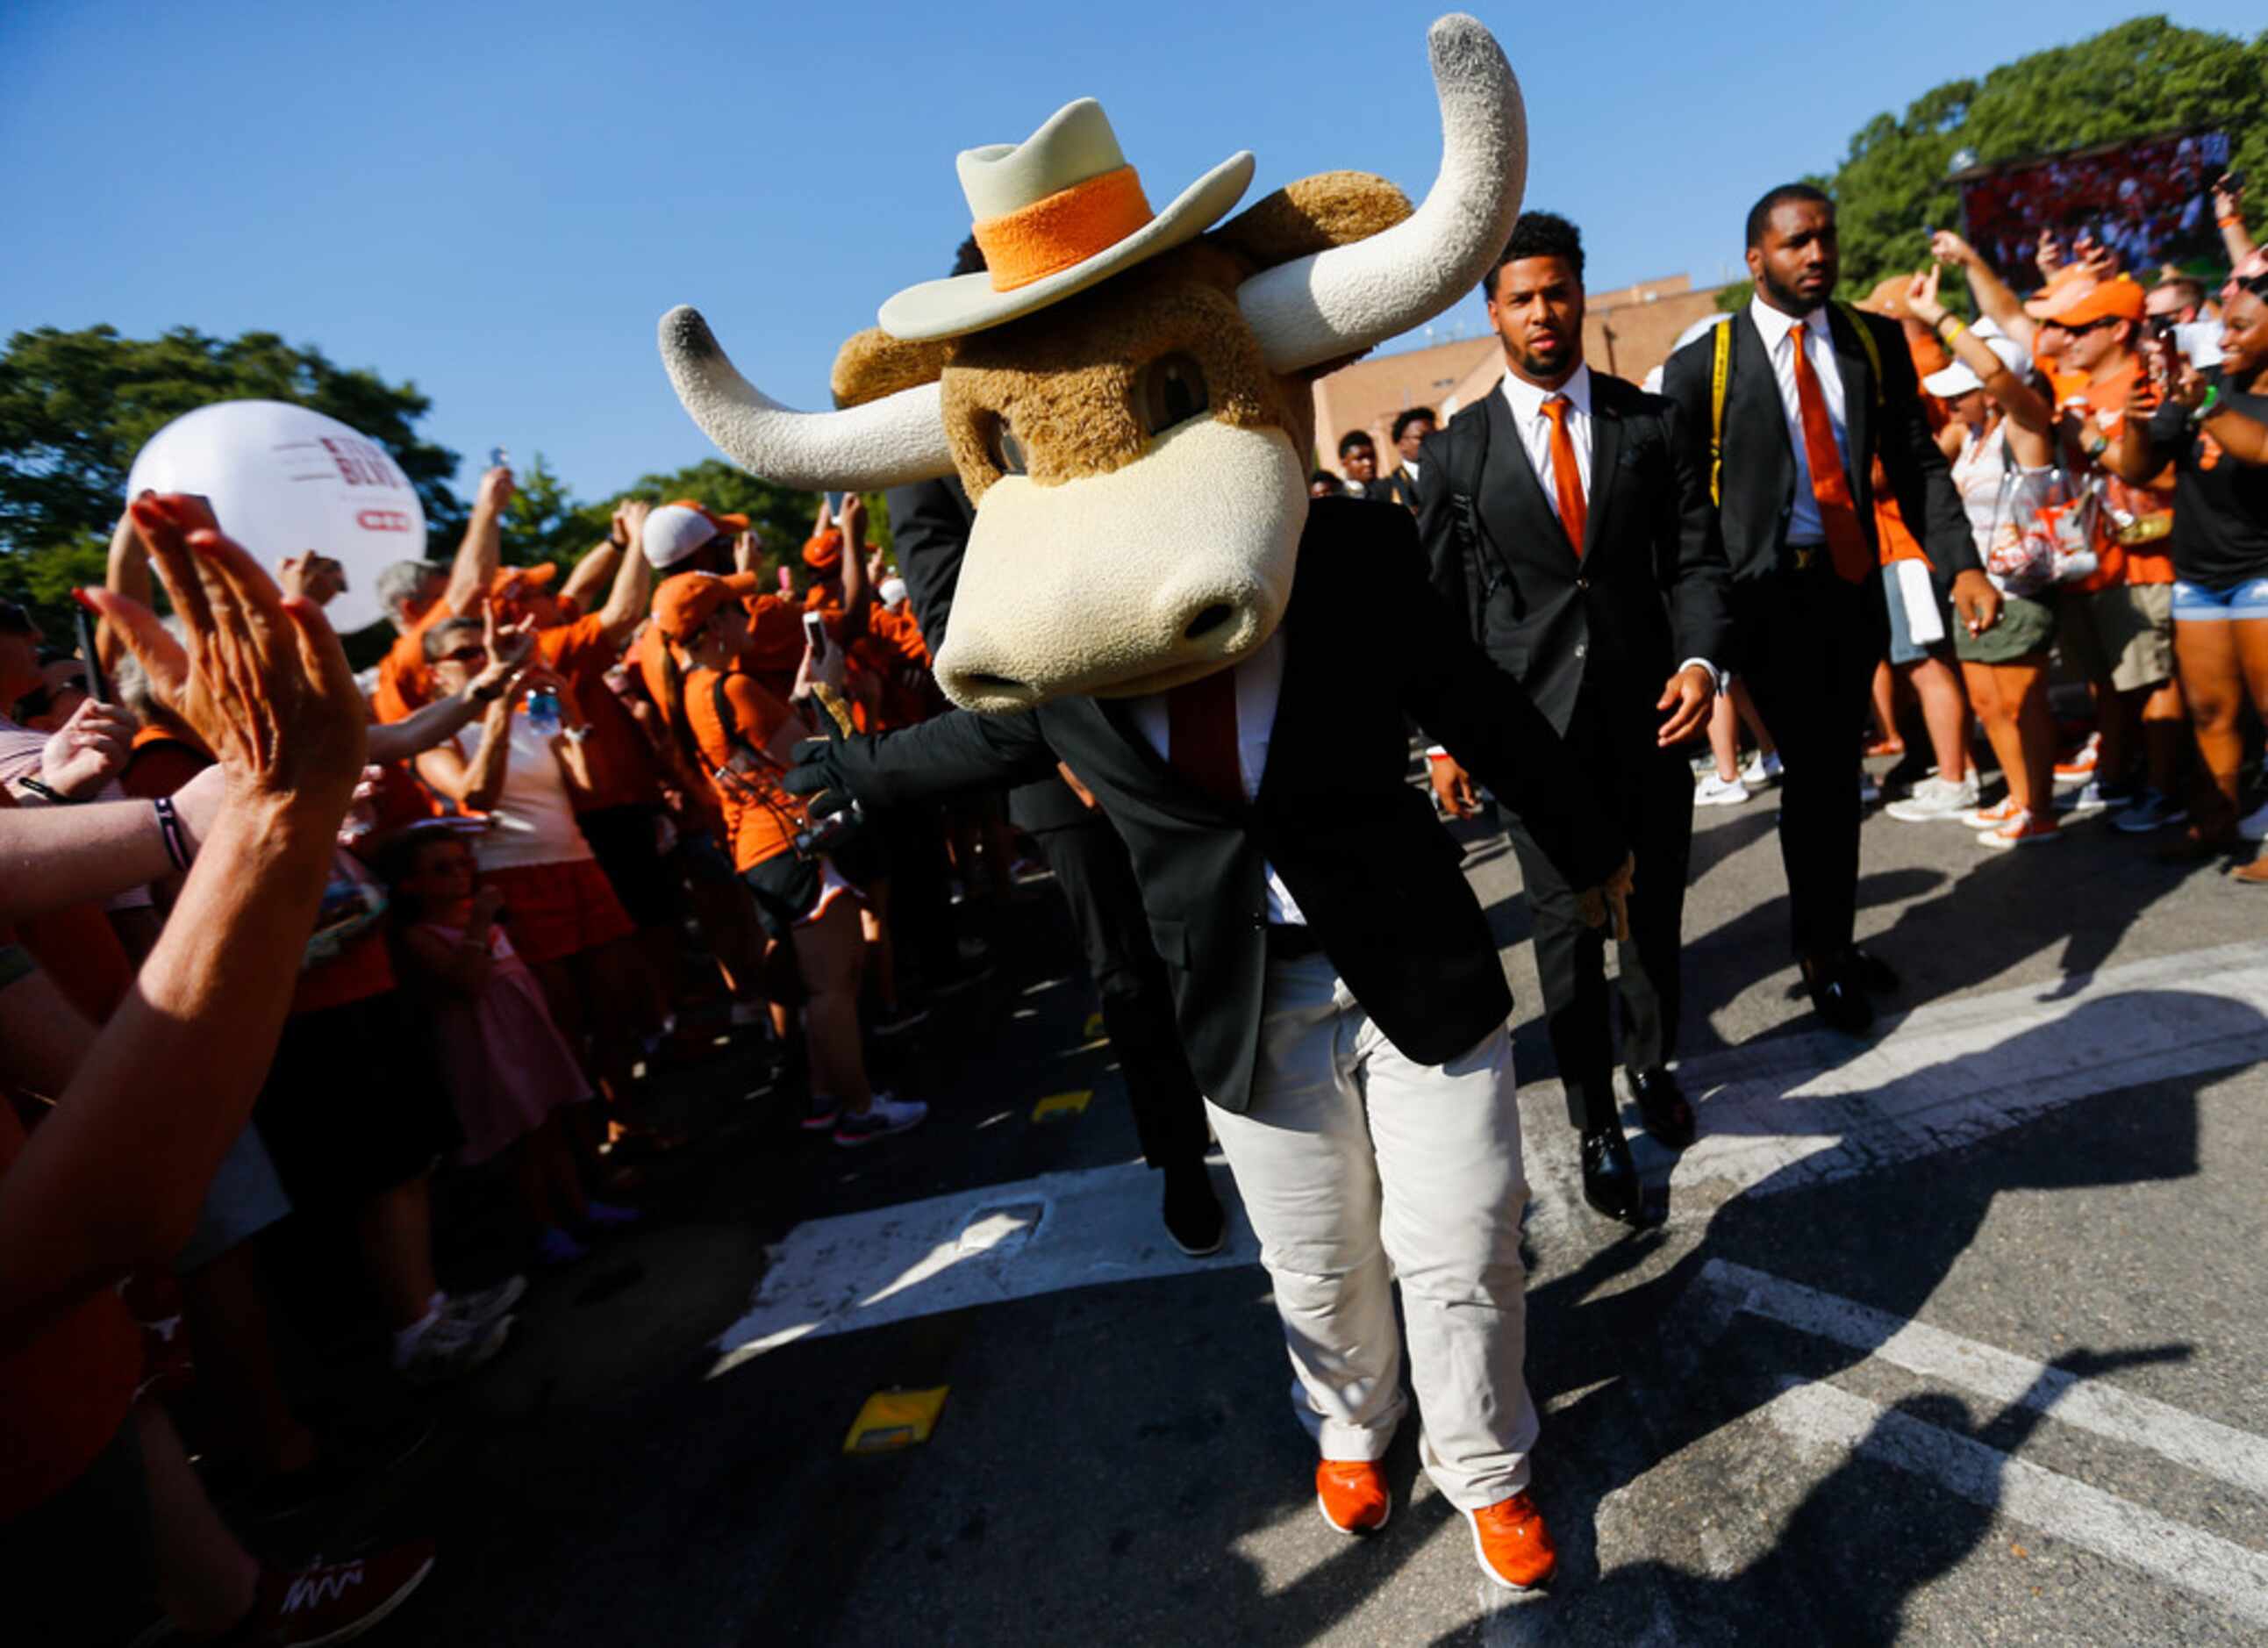 The Texas Longhorns greet fans as they make their way down Bevo Boulevard prior to a college...